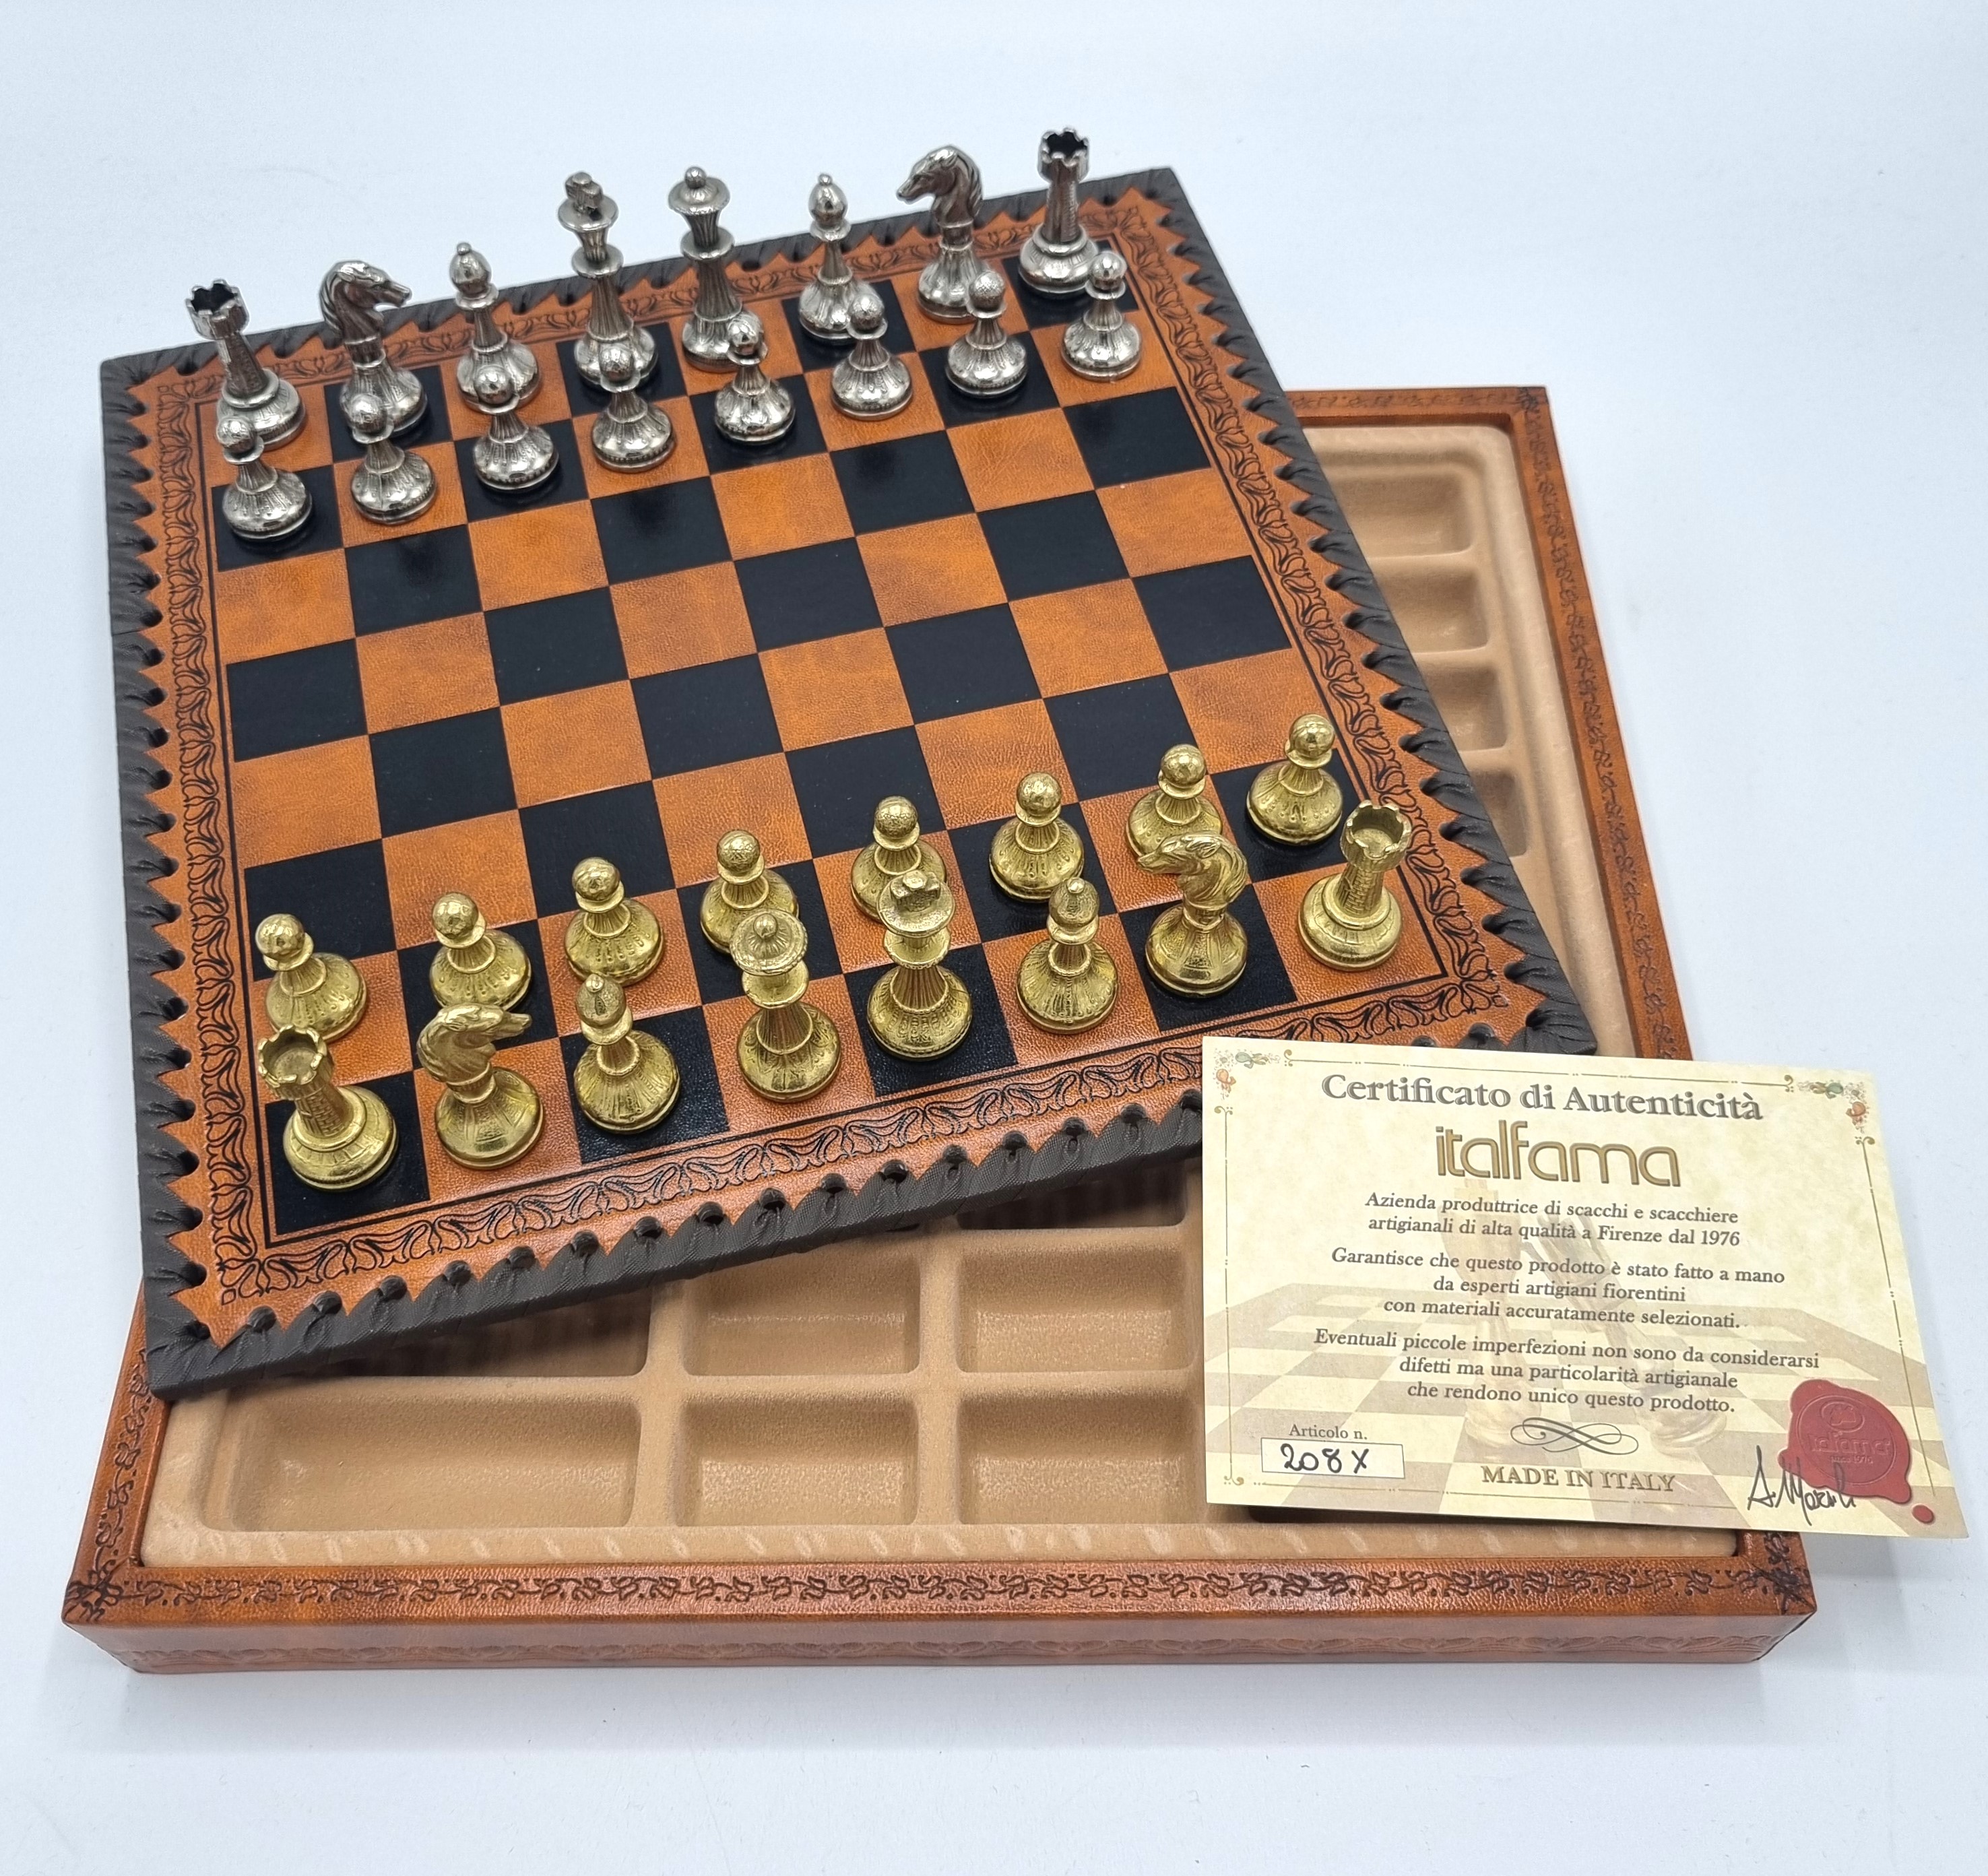 Leather chess cassette with metal pieces